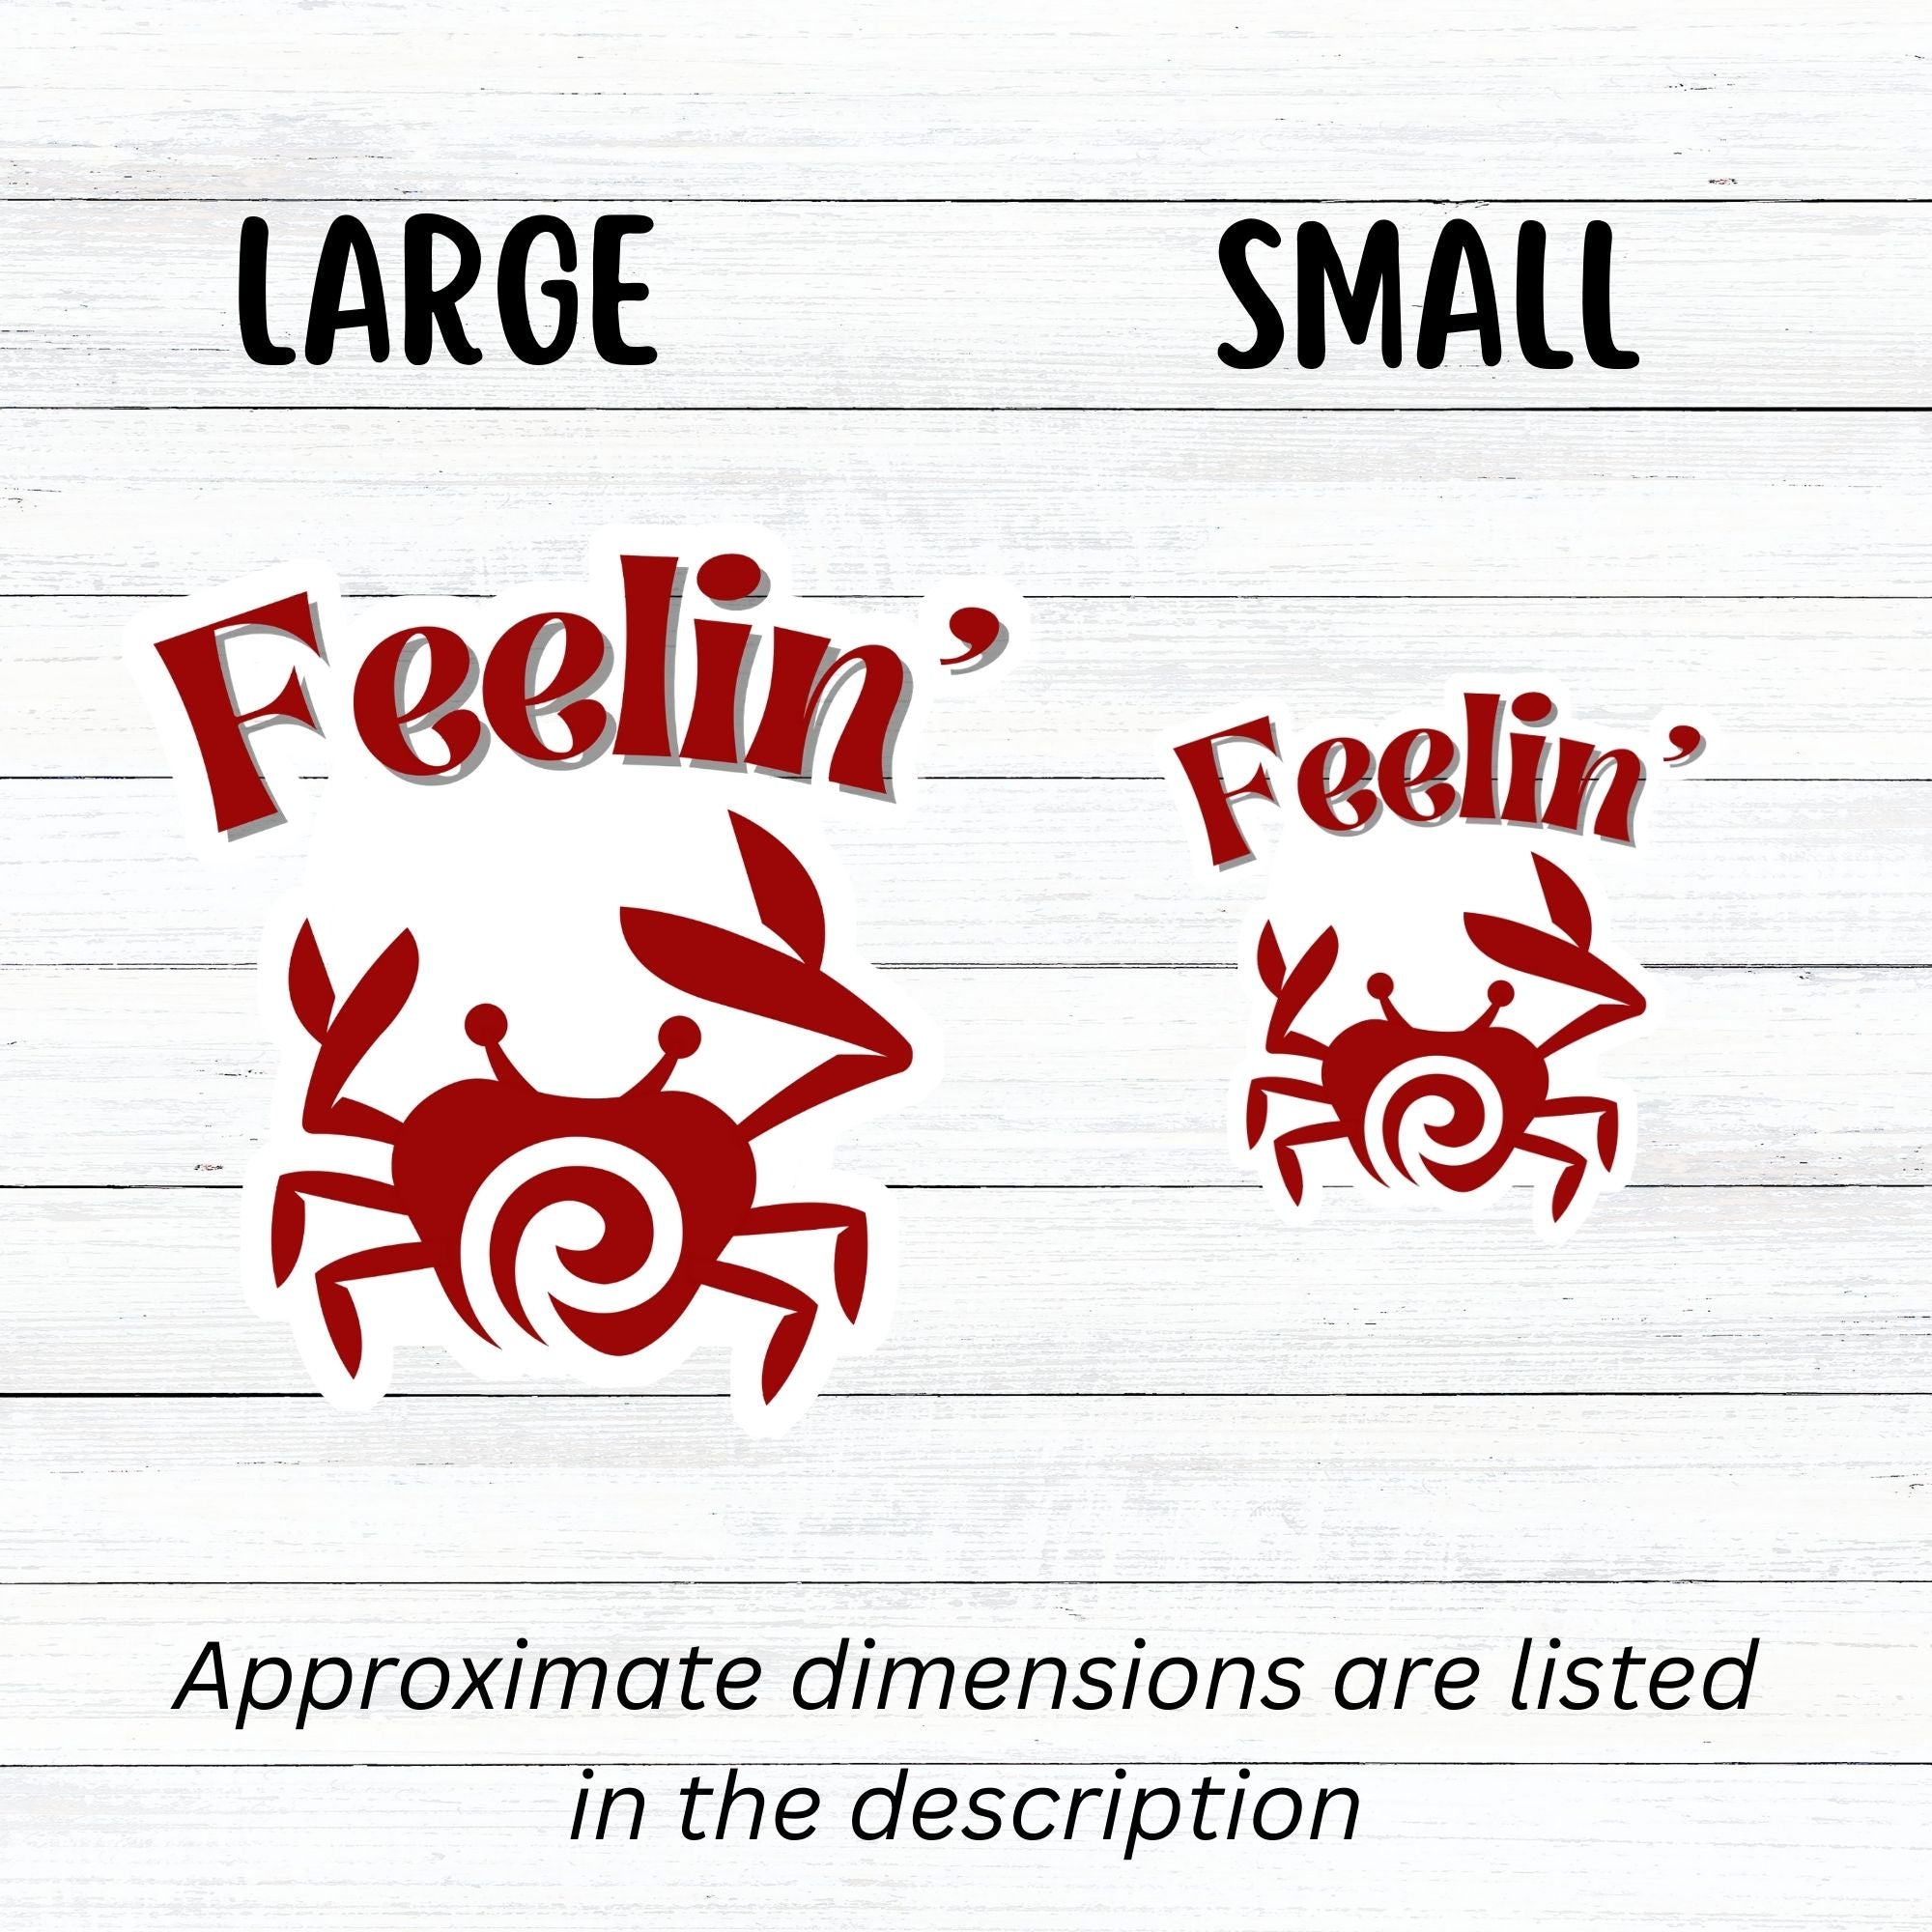 Feelin Crabby? Naw, but sometimes this die cut sticker of a crab is just right for nearly everyone! This image shows large and small Feelin Crabby stickers next to each other.